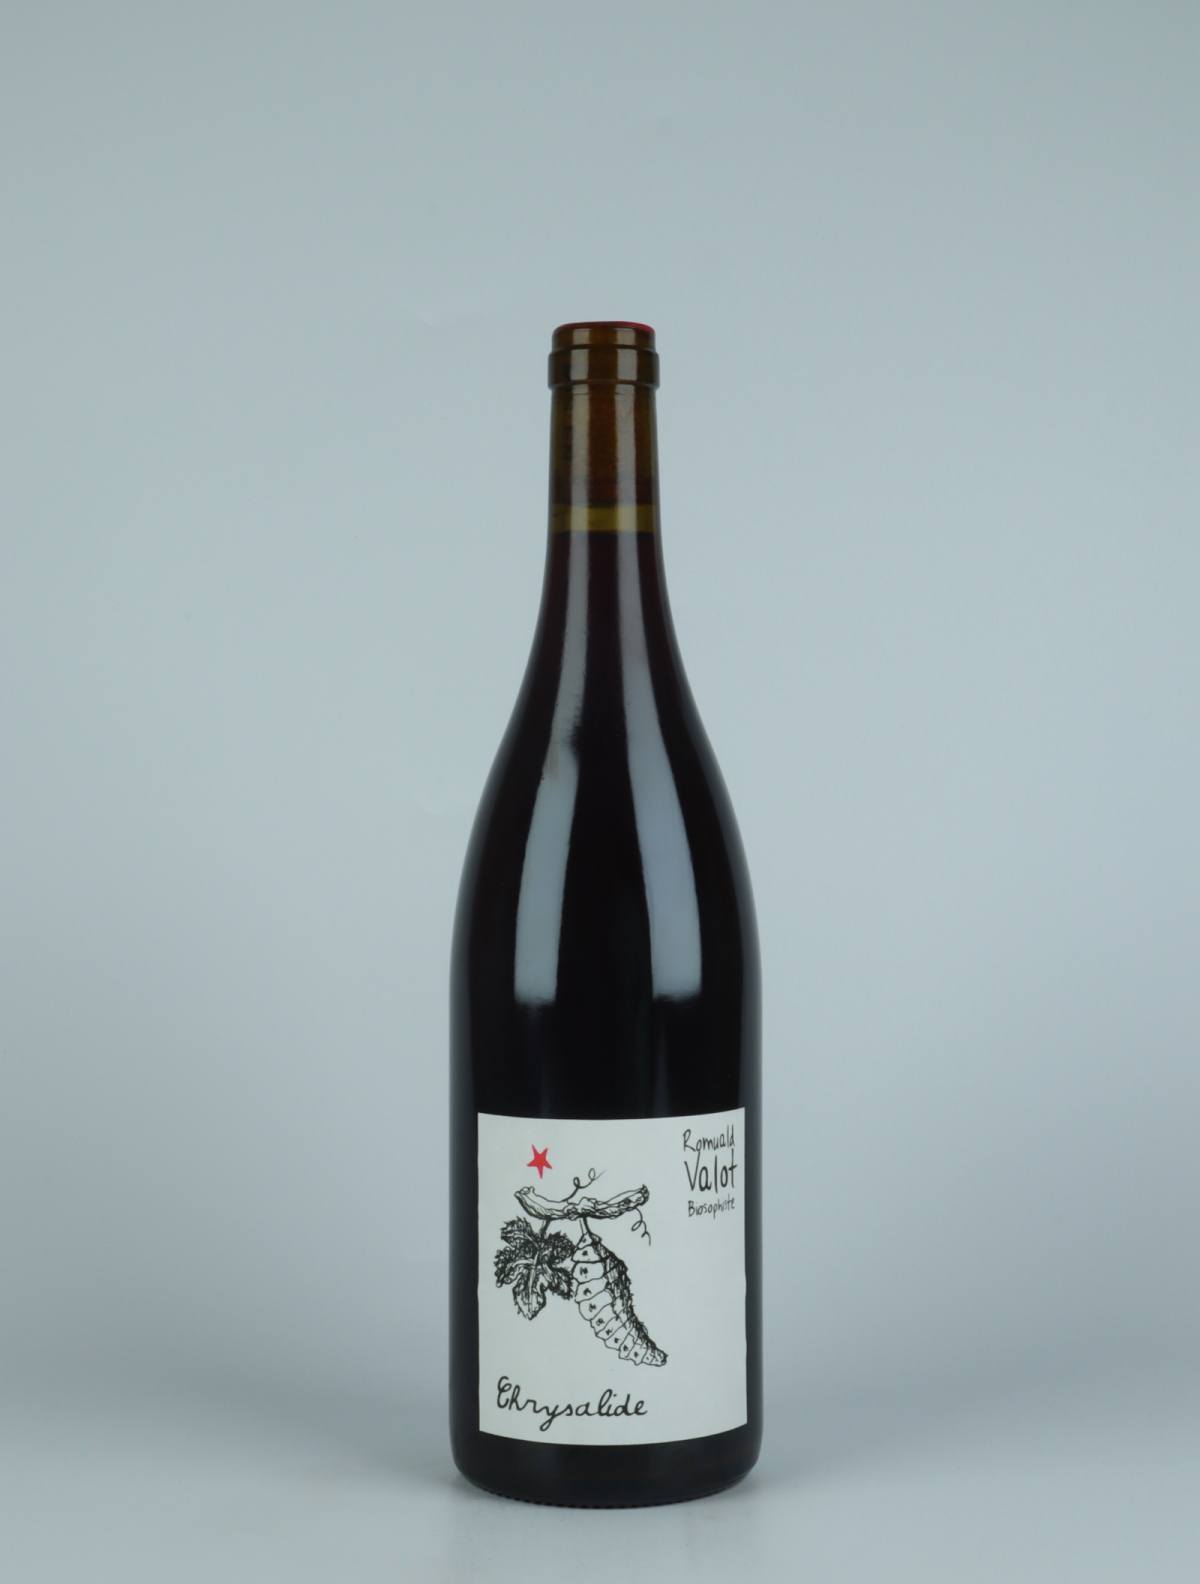 A bottle 2022 Chrysalide Red wine from Romuald Valot, Beaujolais in France